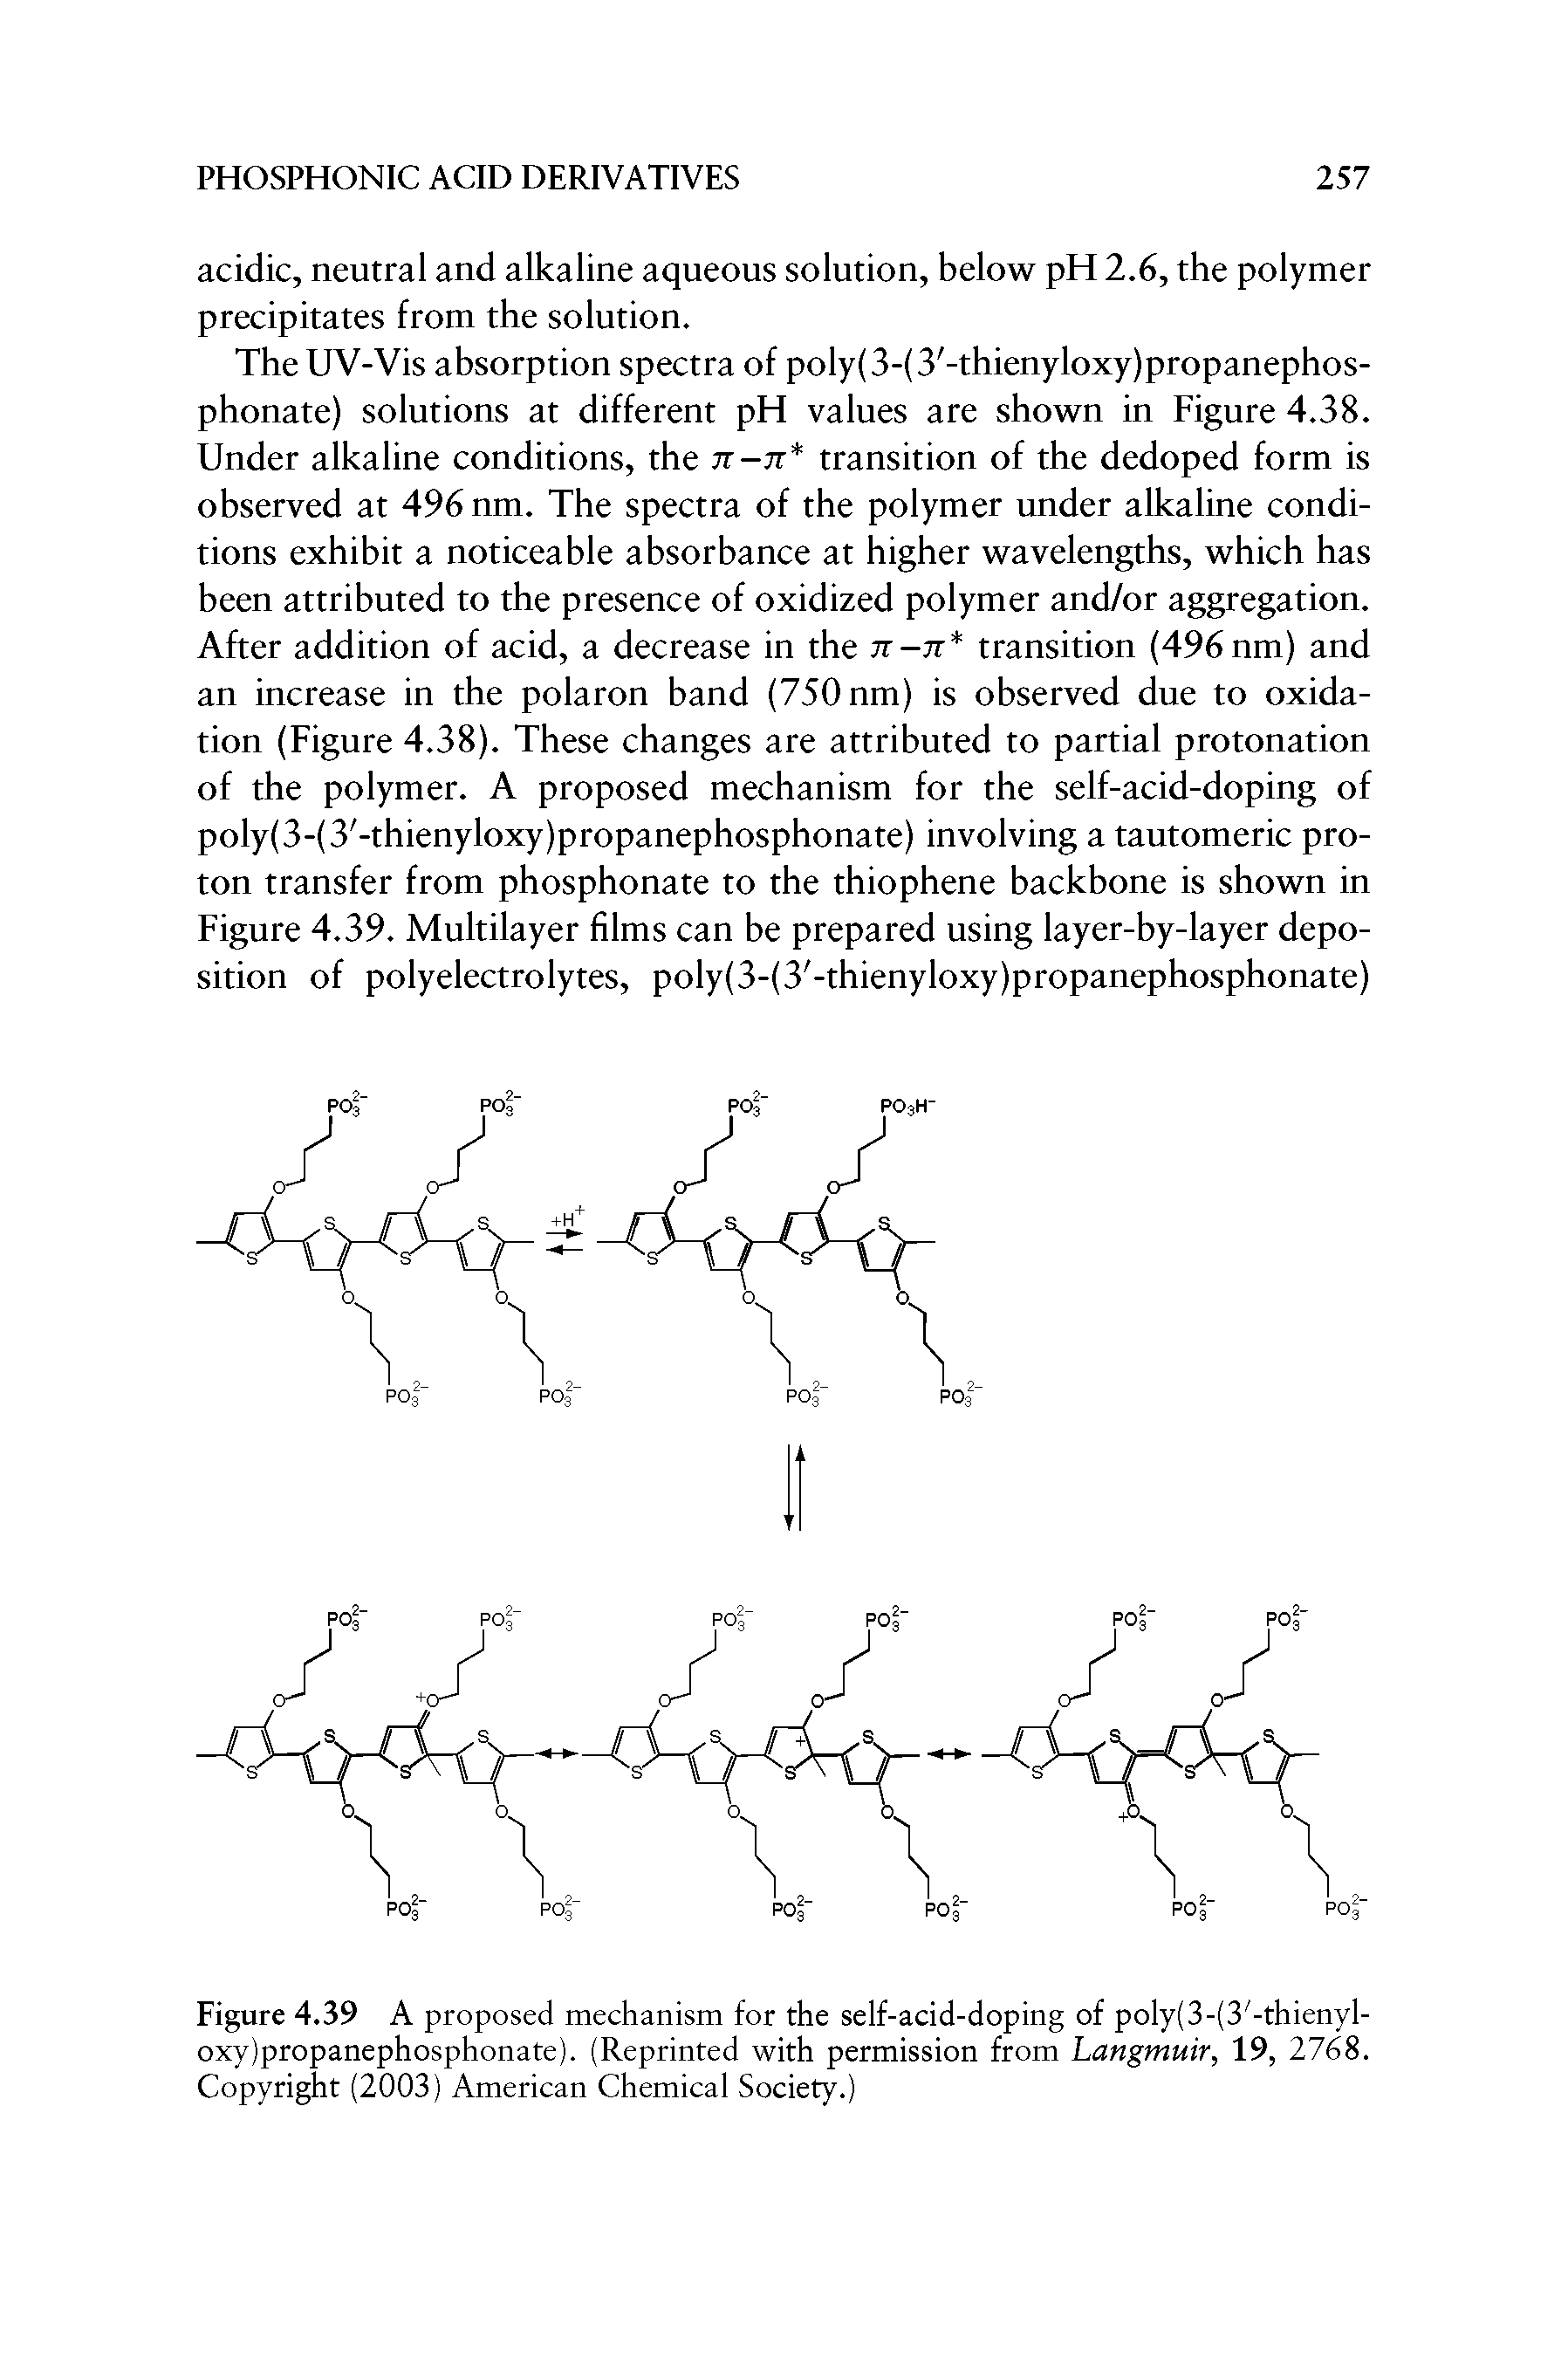 Figure 4.39 A proposed mechanism for the self-acid-doping of poly(3-(3 -thienyl-oxy)propanephosphonate). (Reprinted with permission from Langmuir, 19, 2768. Copyright (2003) American Chemical Society.)...